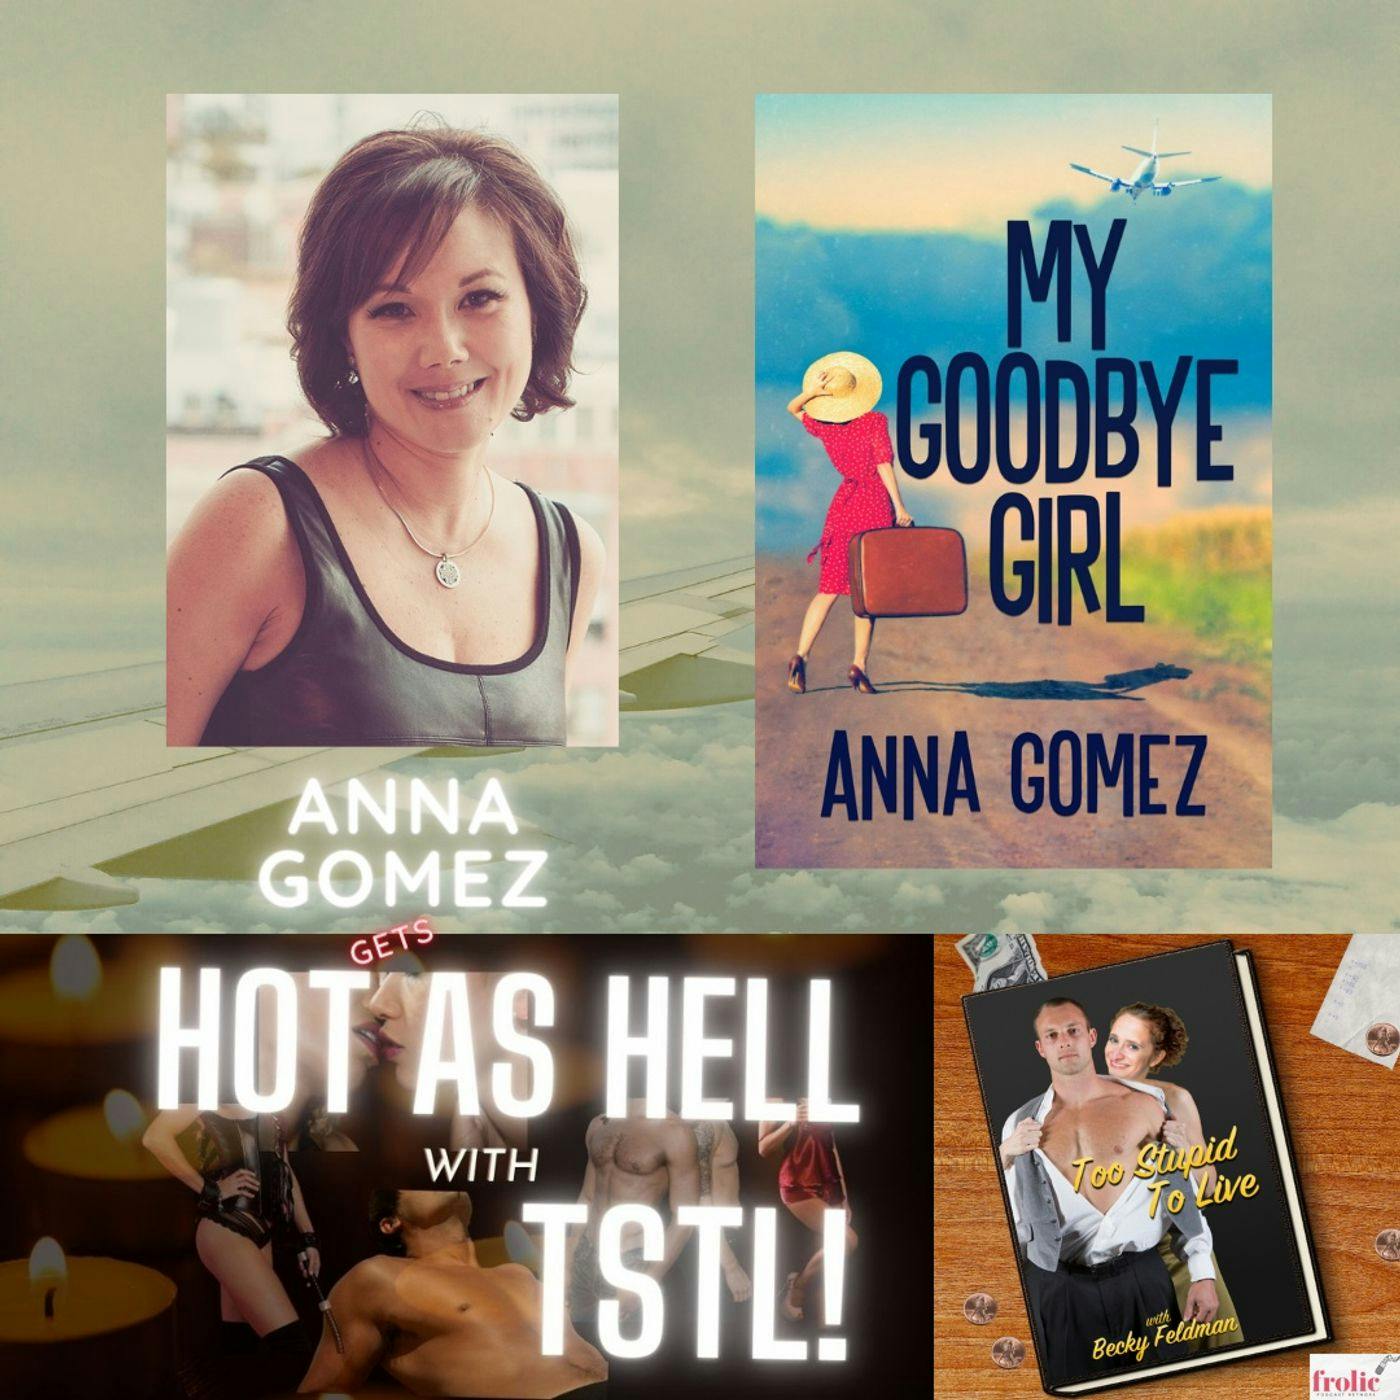 Anna Gomez Gets HOT AS HELL with TSTL!